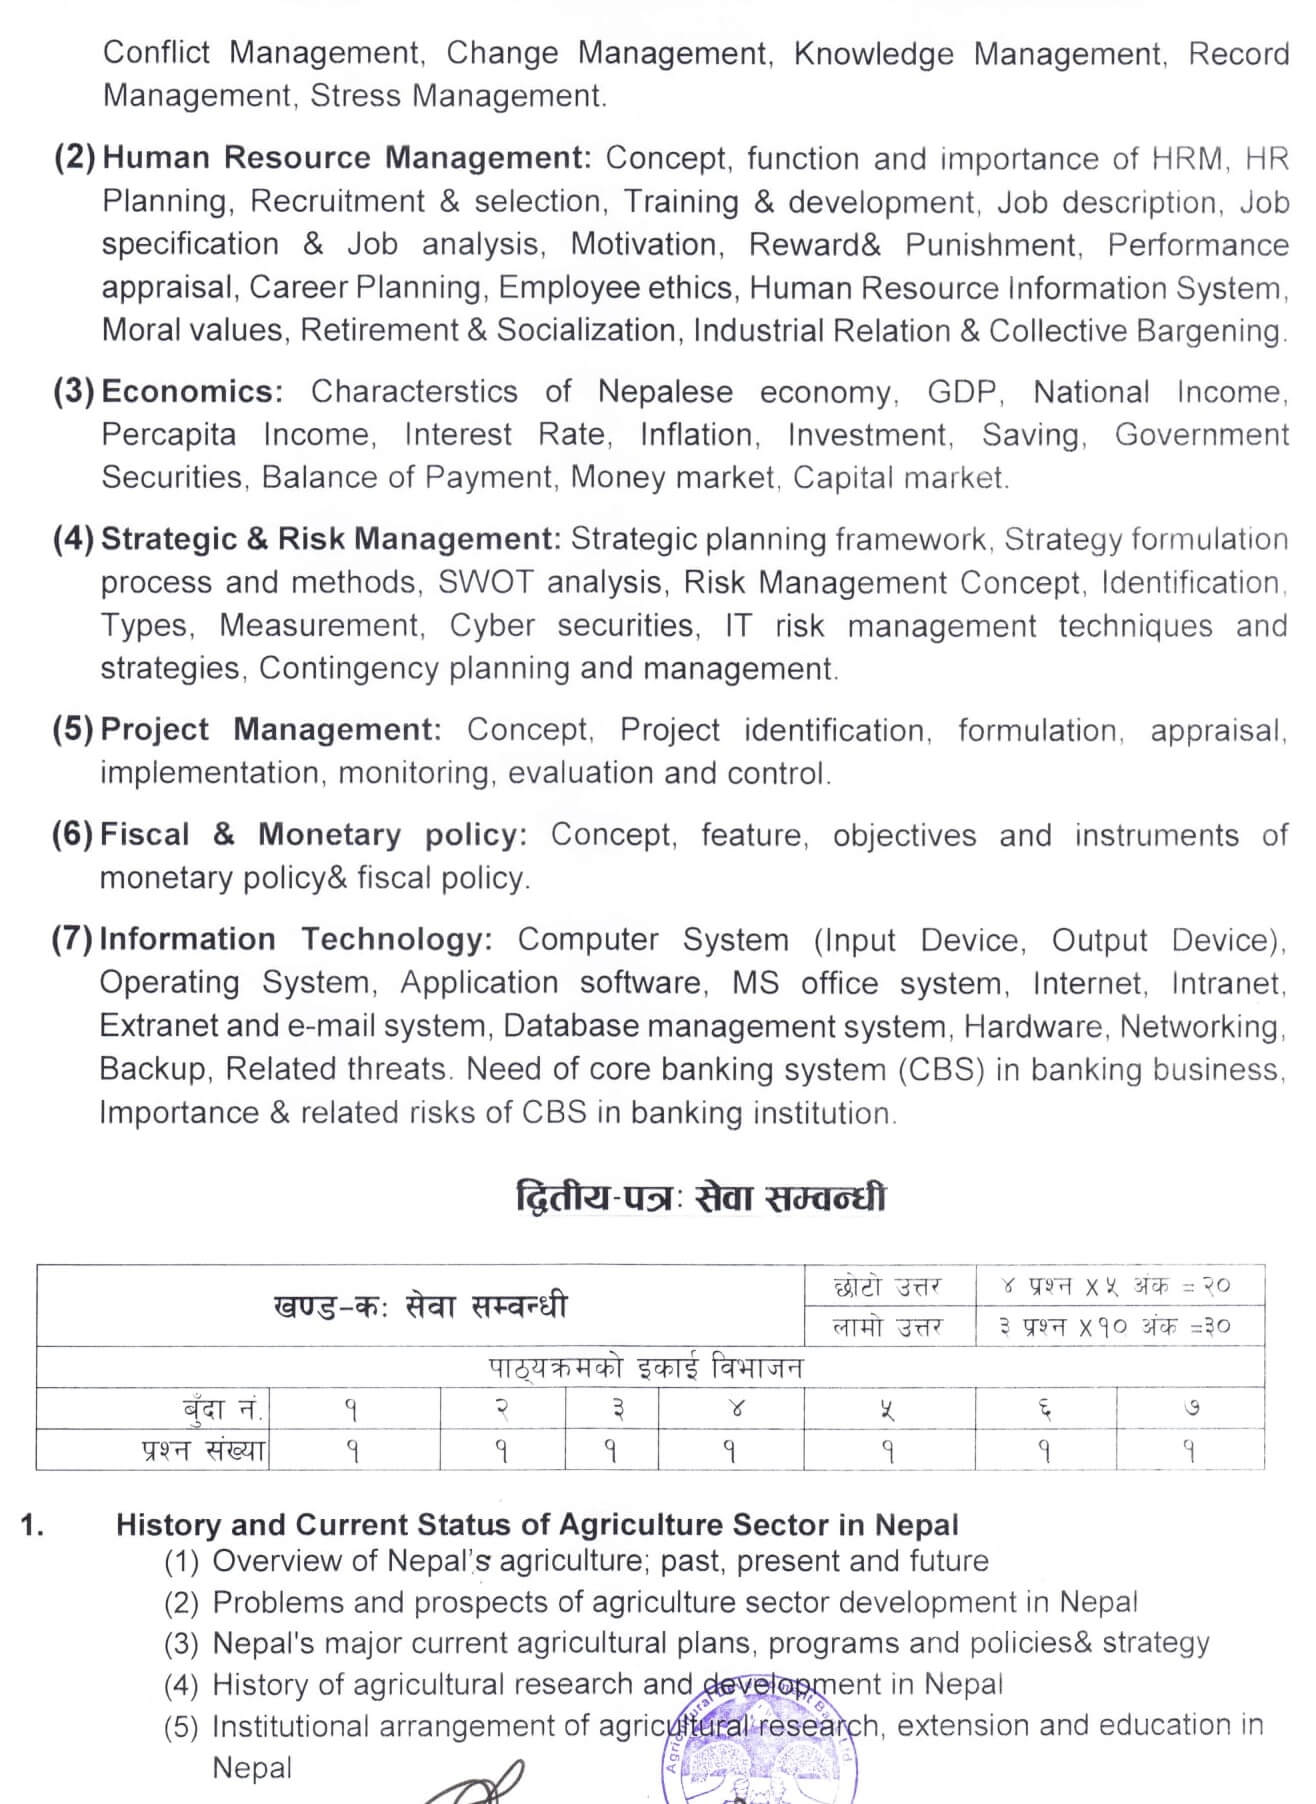 Syllabus of Agricultural Development Bank Level 6 Loan Officer